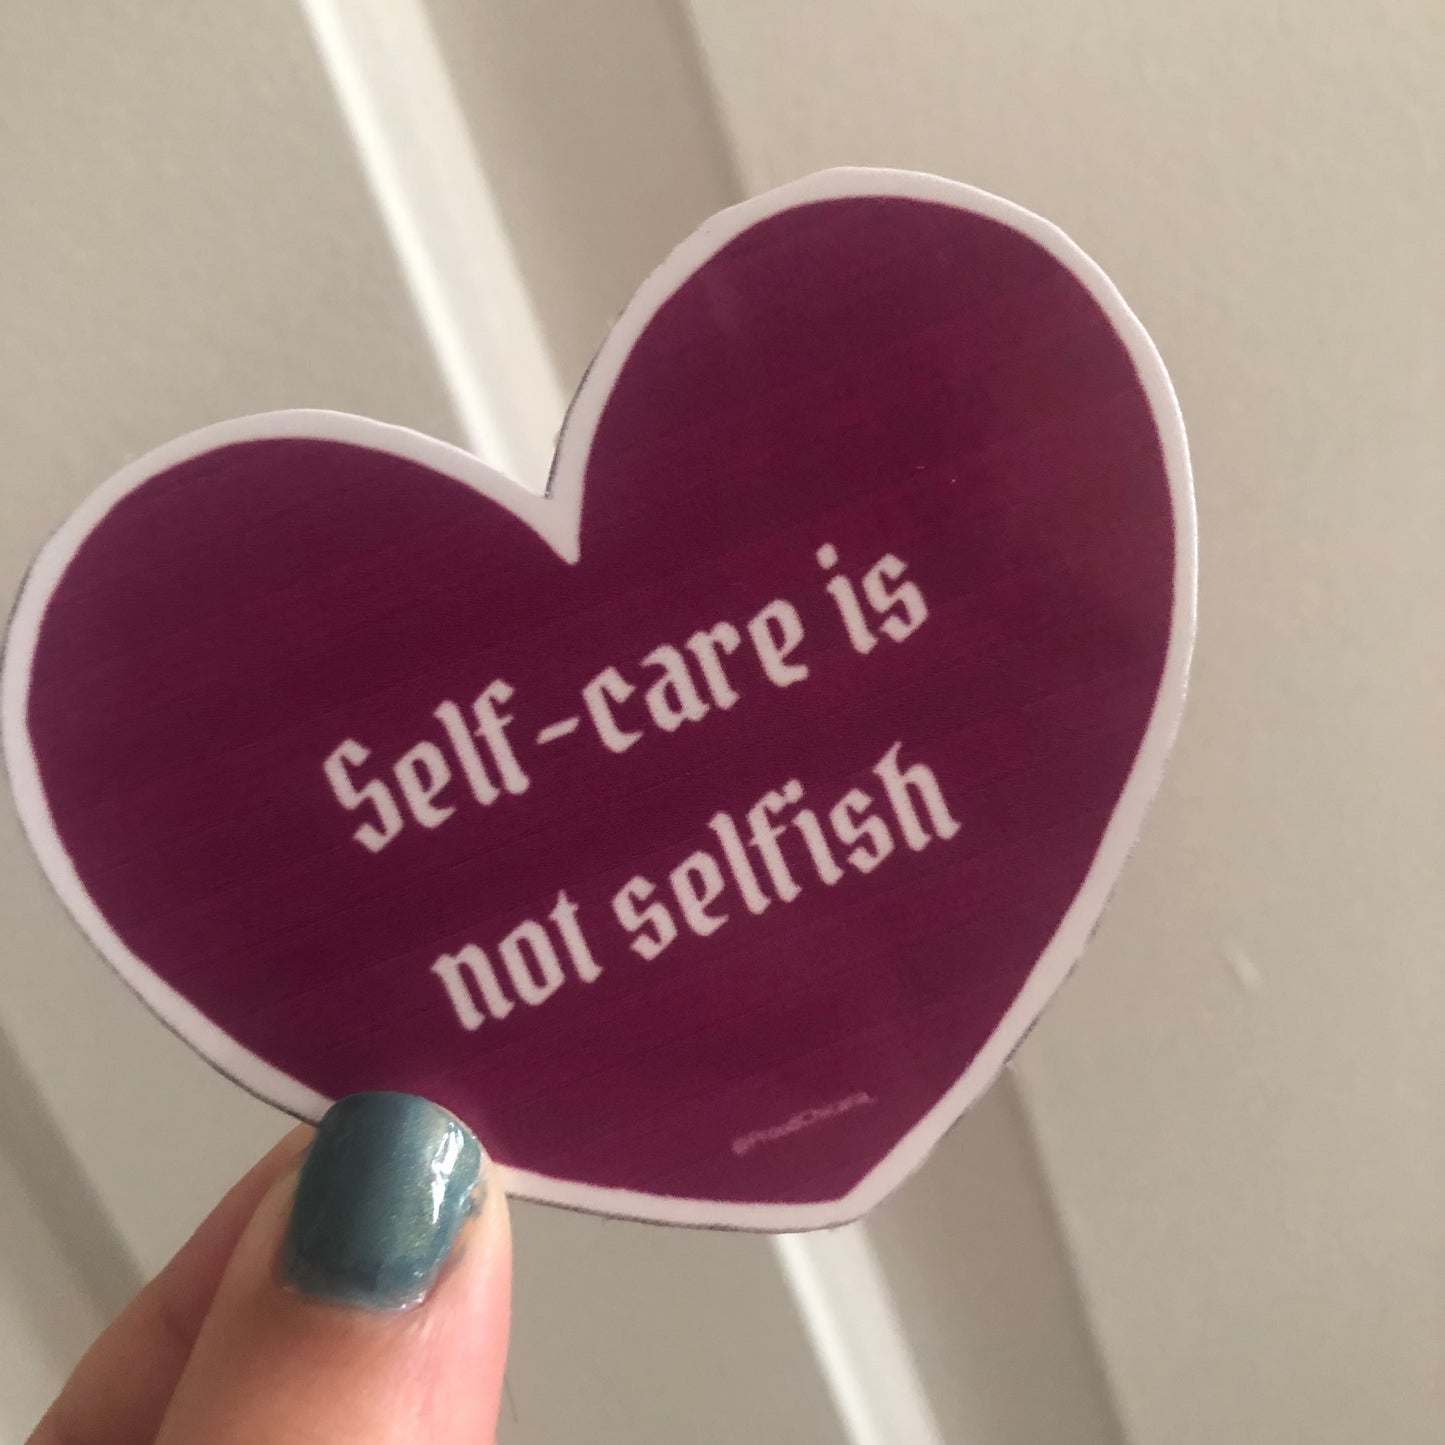 Self-care is not selfish sticker